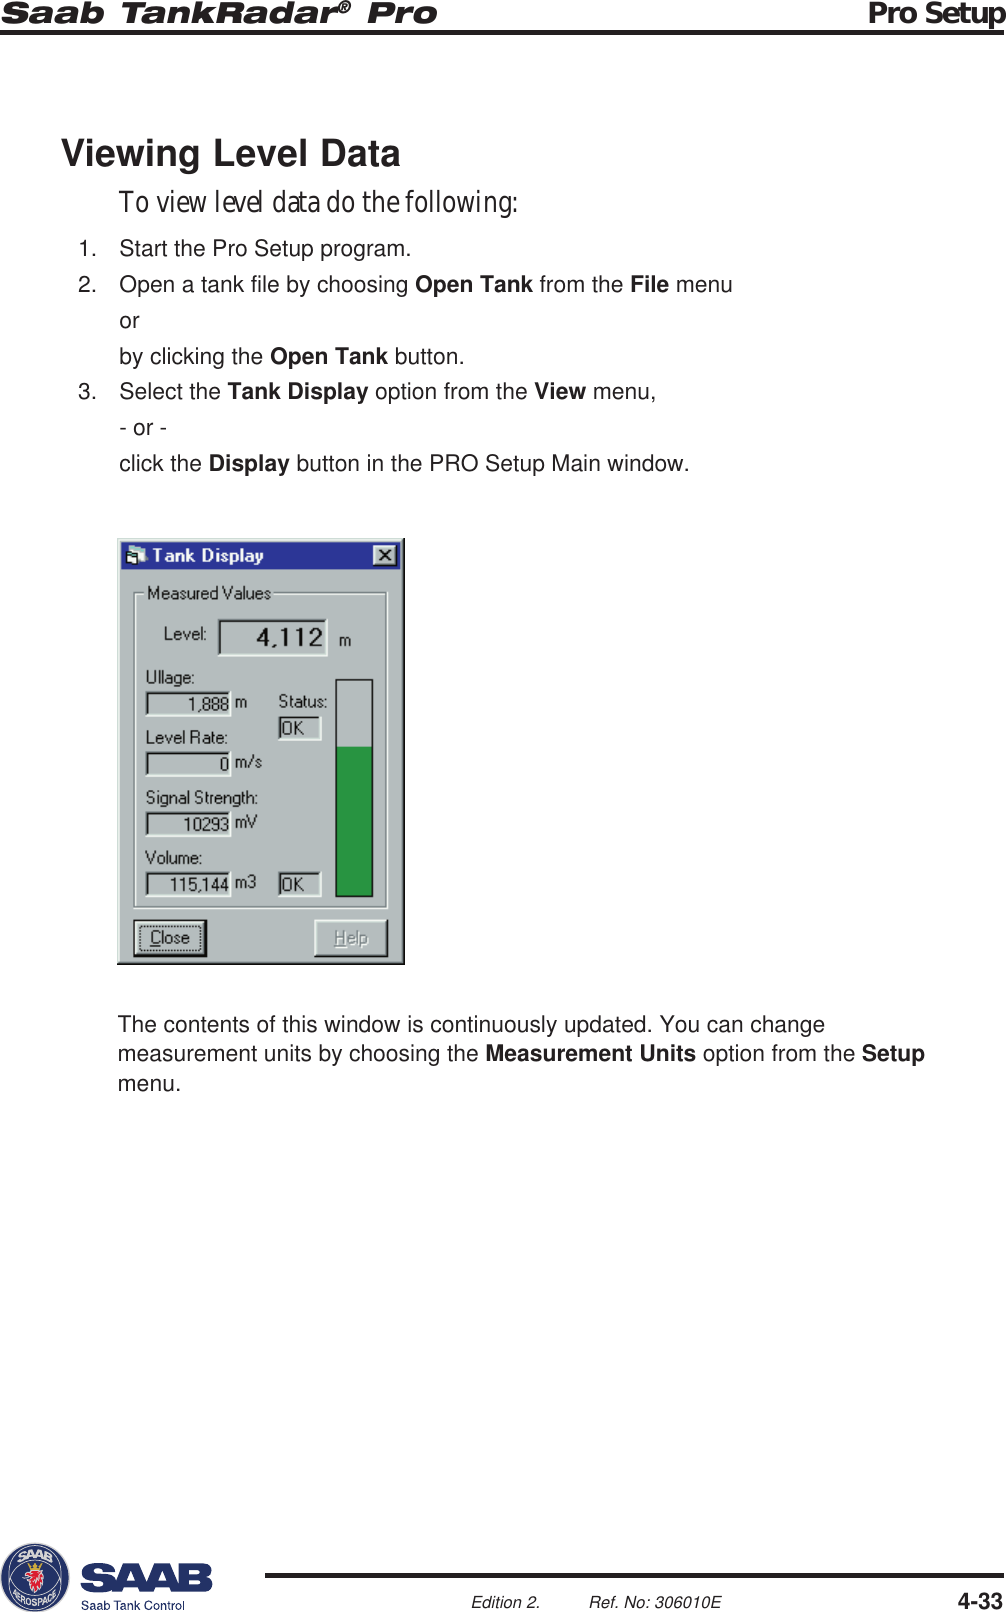 Saab TankRadar® Pro Pro Setup4-33Edition 2. Ref. No: 306010EViewing Level DataTo view level data do the following:1. Start the Pro Setup program.2. Open a tank file by choosing Open Tank from the File menuorby clicking the Open Tank button.3. Select the Tank Display option from the View menu,- or -click the Display button in the PRO Setup Main window.The contents of this window is continuously updated. You can changemeasurement units by choosing the Measurement Units option from the Setupmenu.